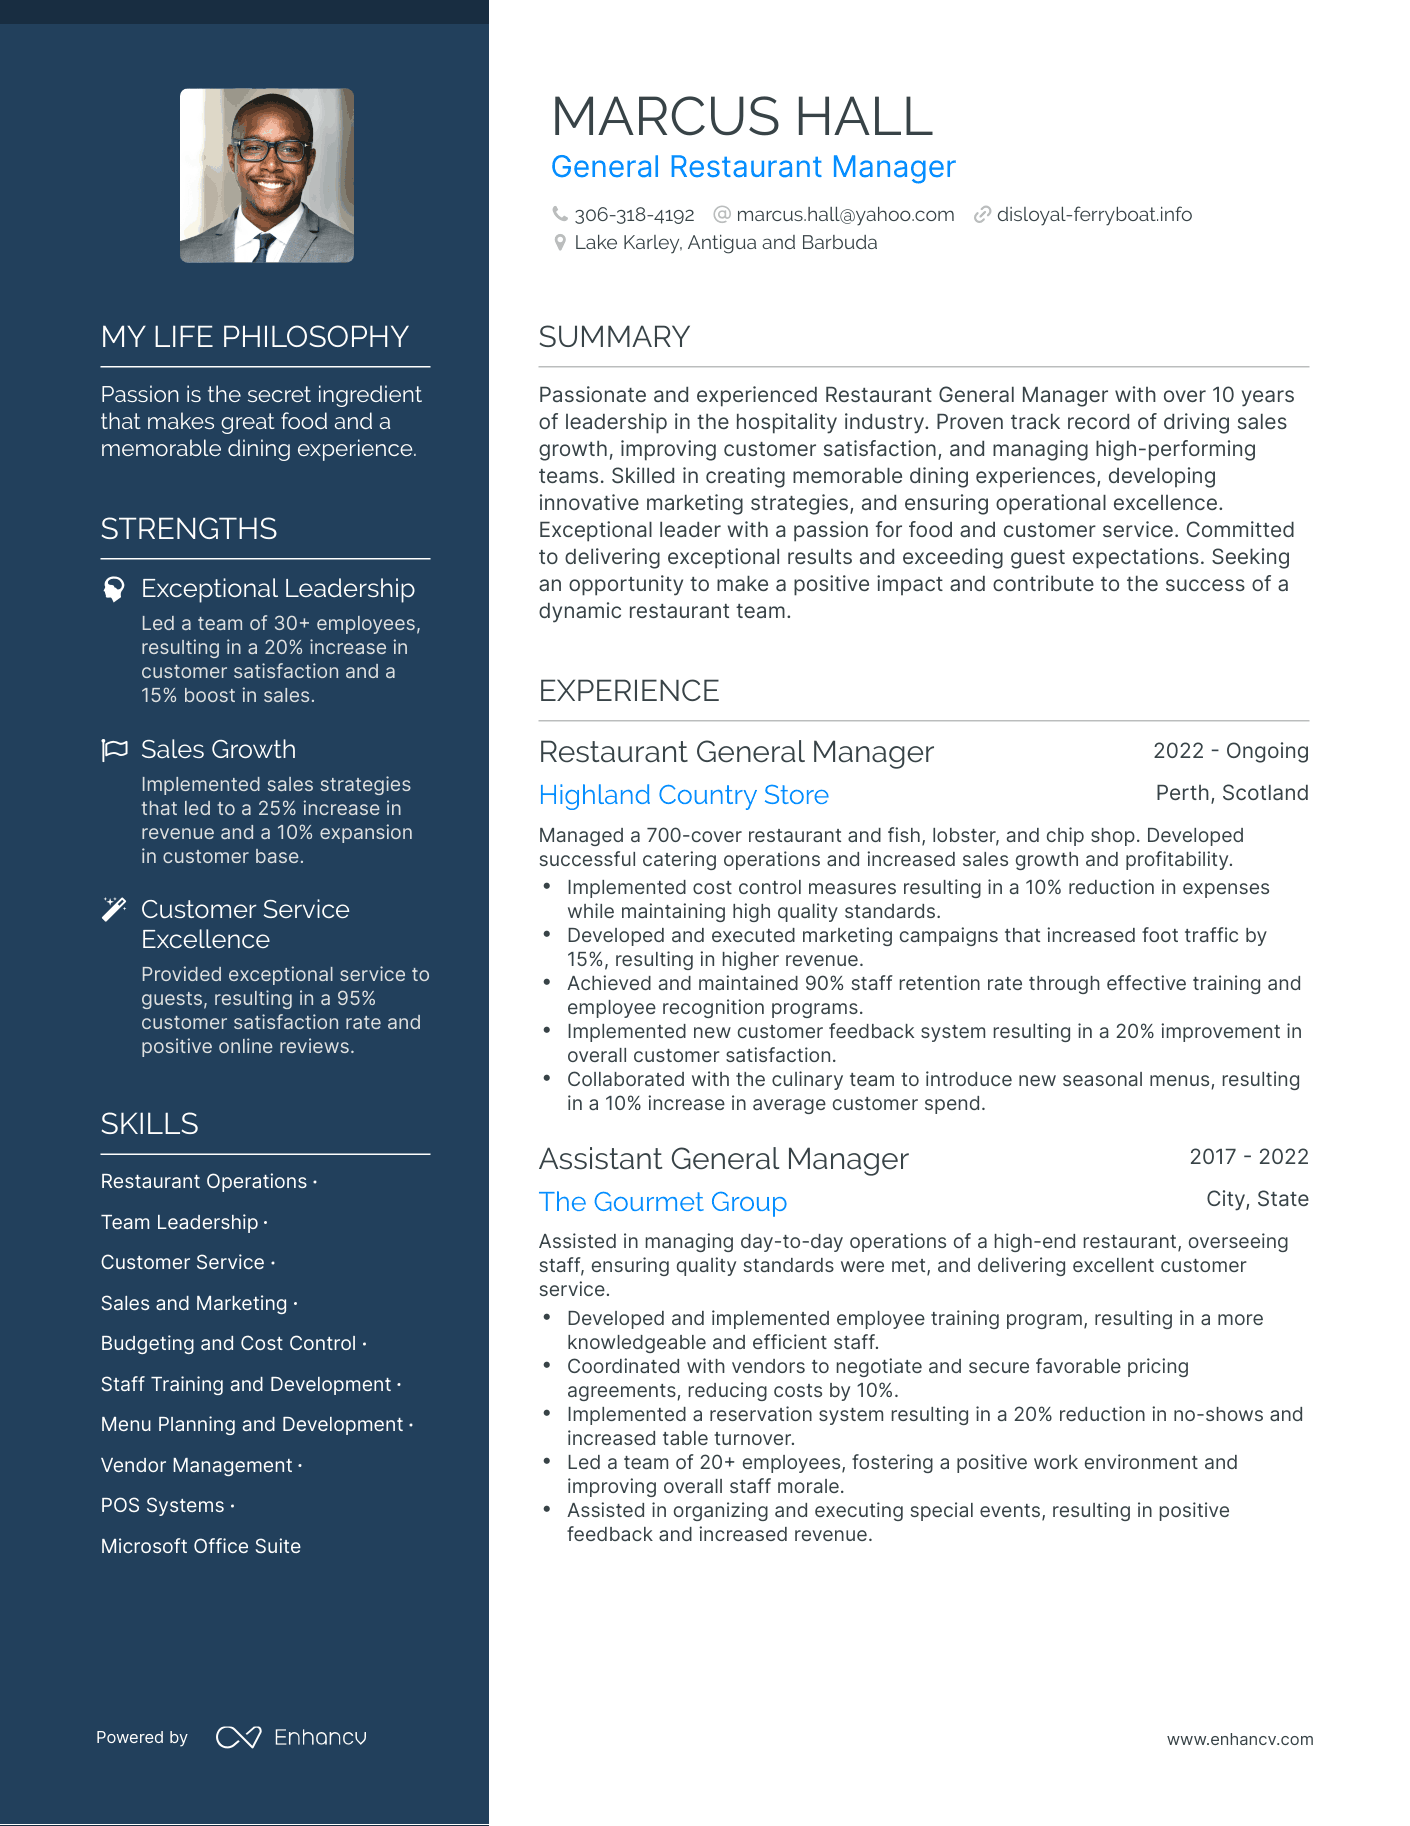 General Restaurant Manager resume example